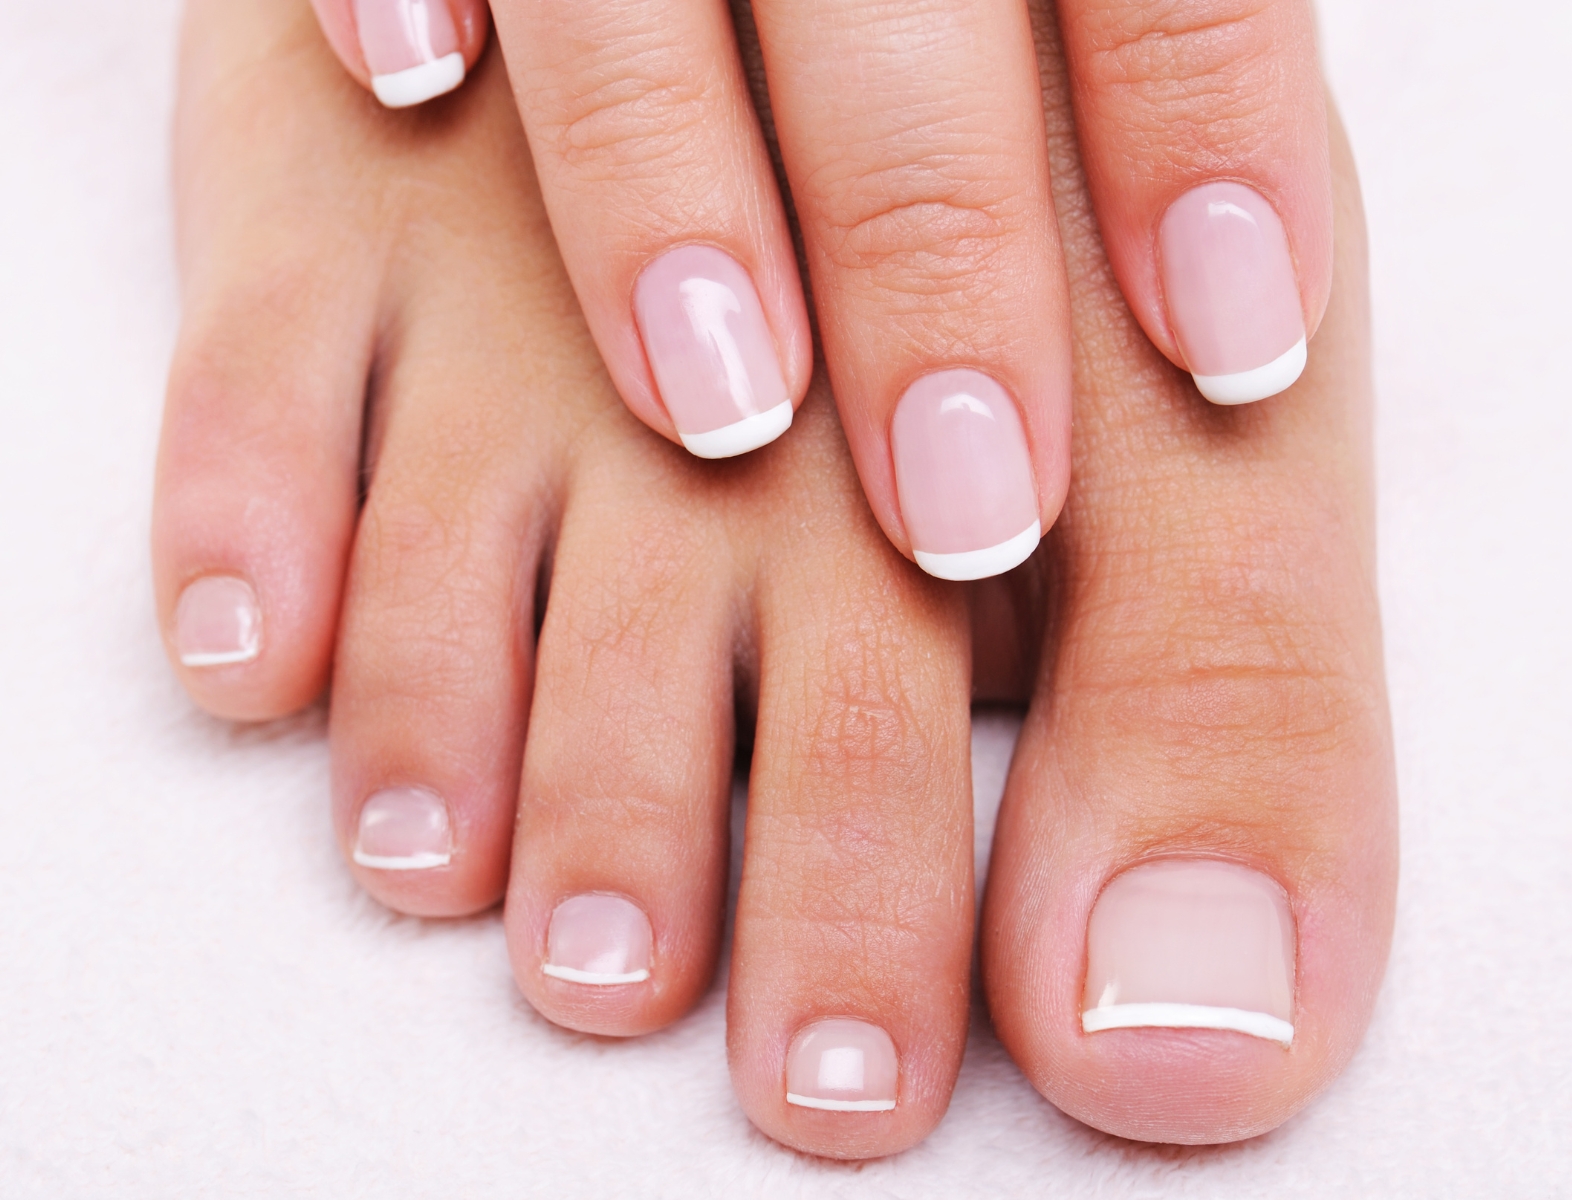 7. Nails_Spa Services Home Page